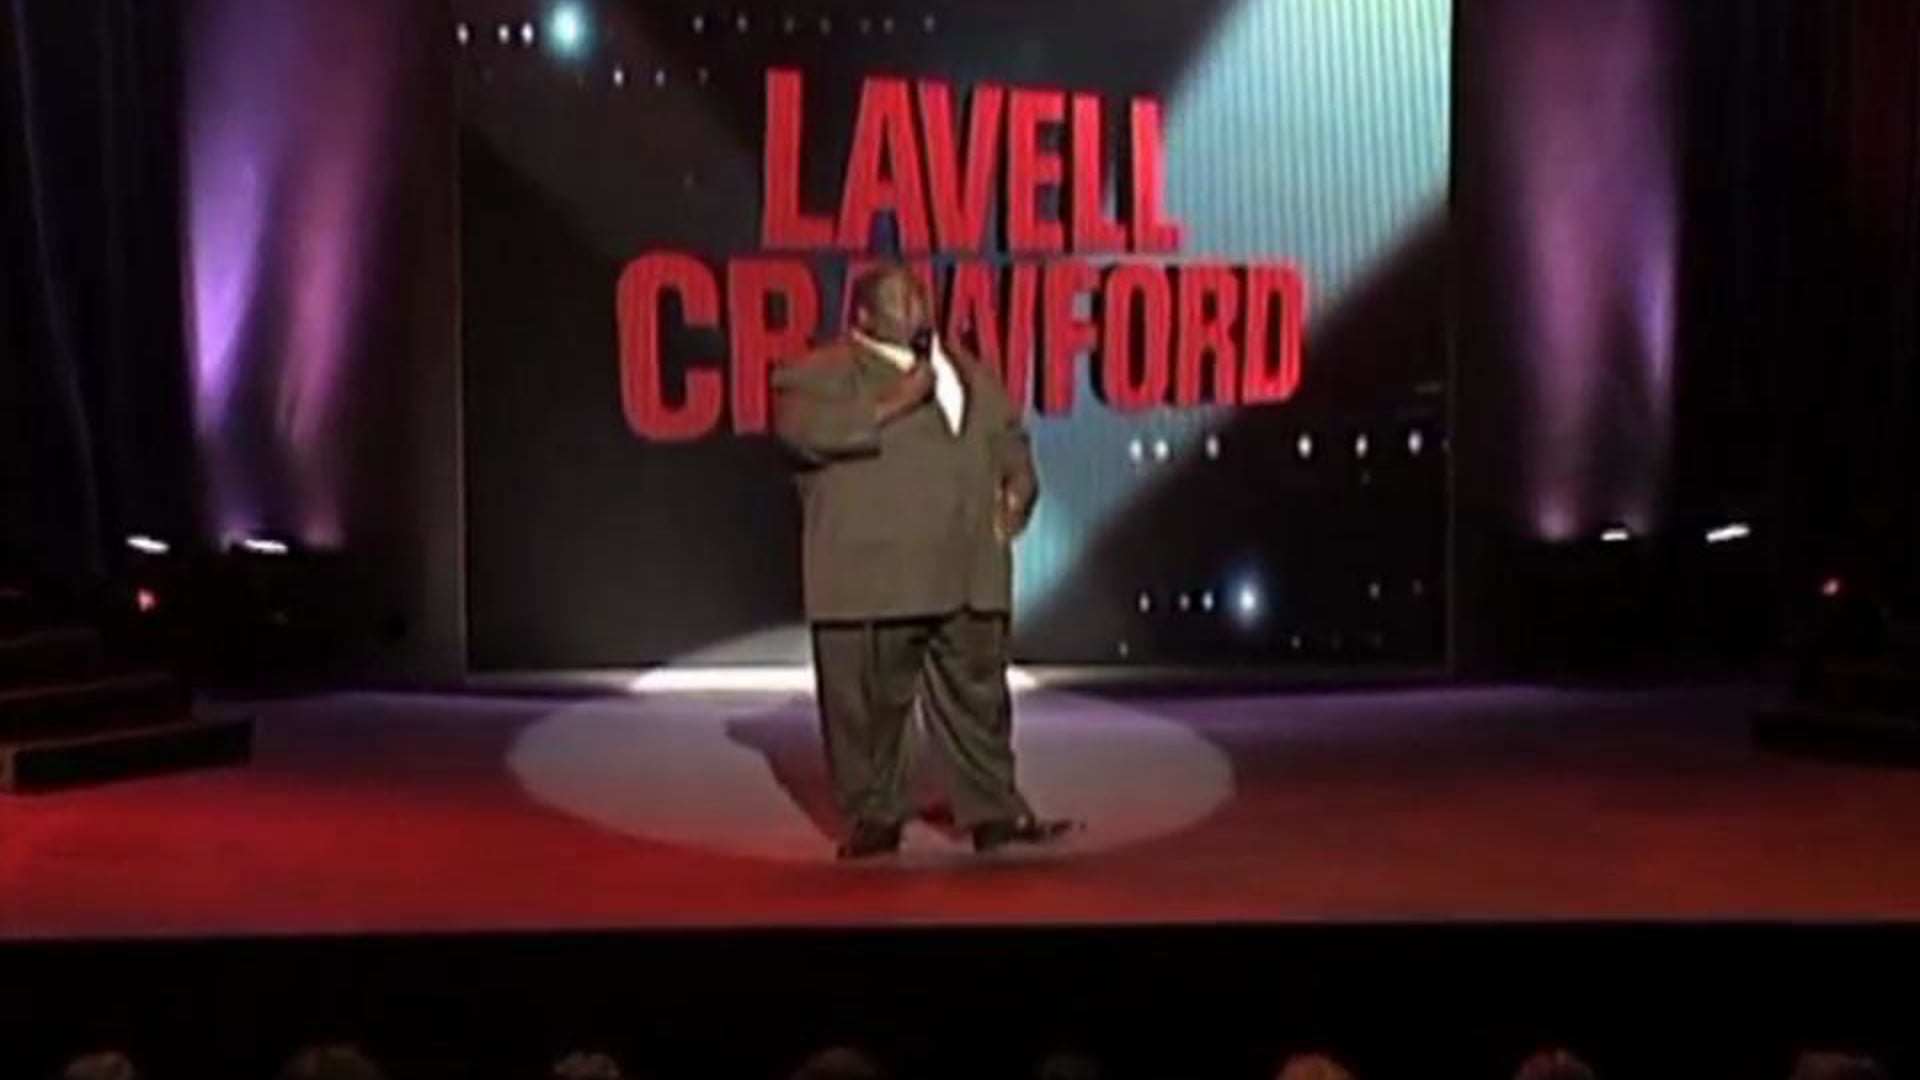 NBC Last Comic Standing Role - Editor for Network shoe featuring Amy Shumer and Lavell Crawford